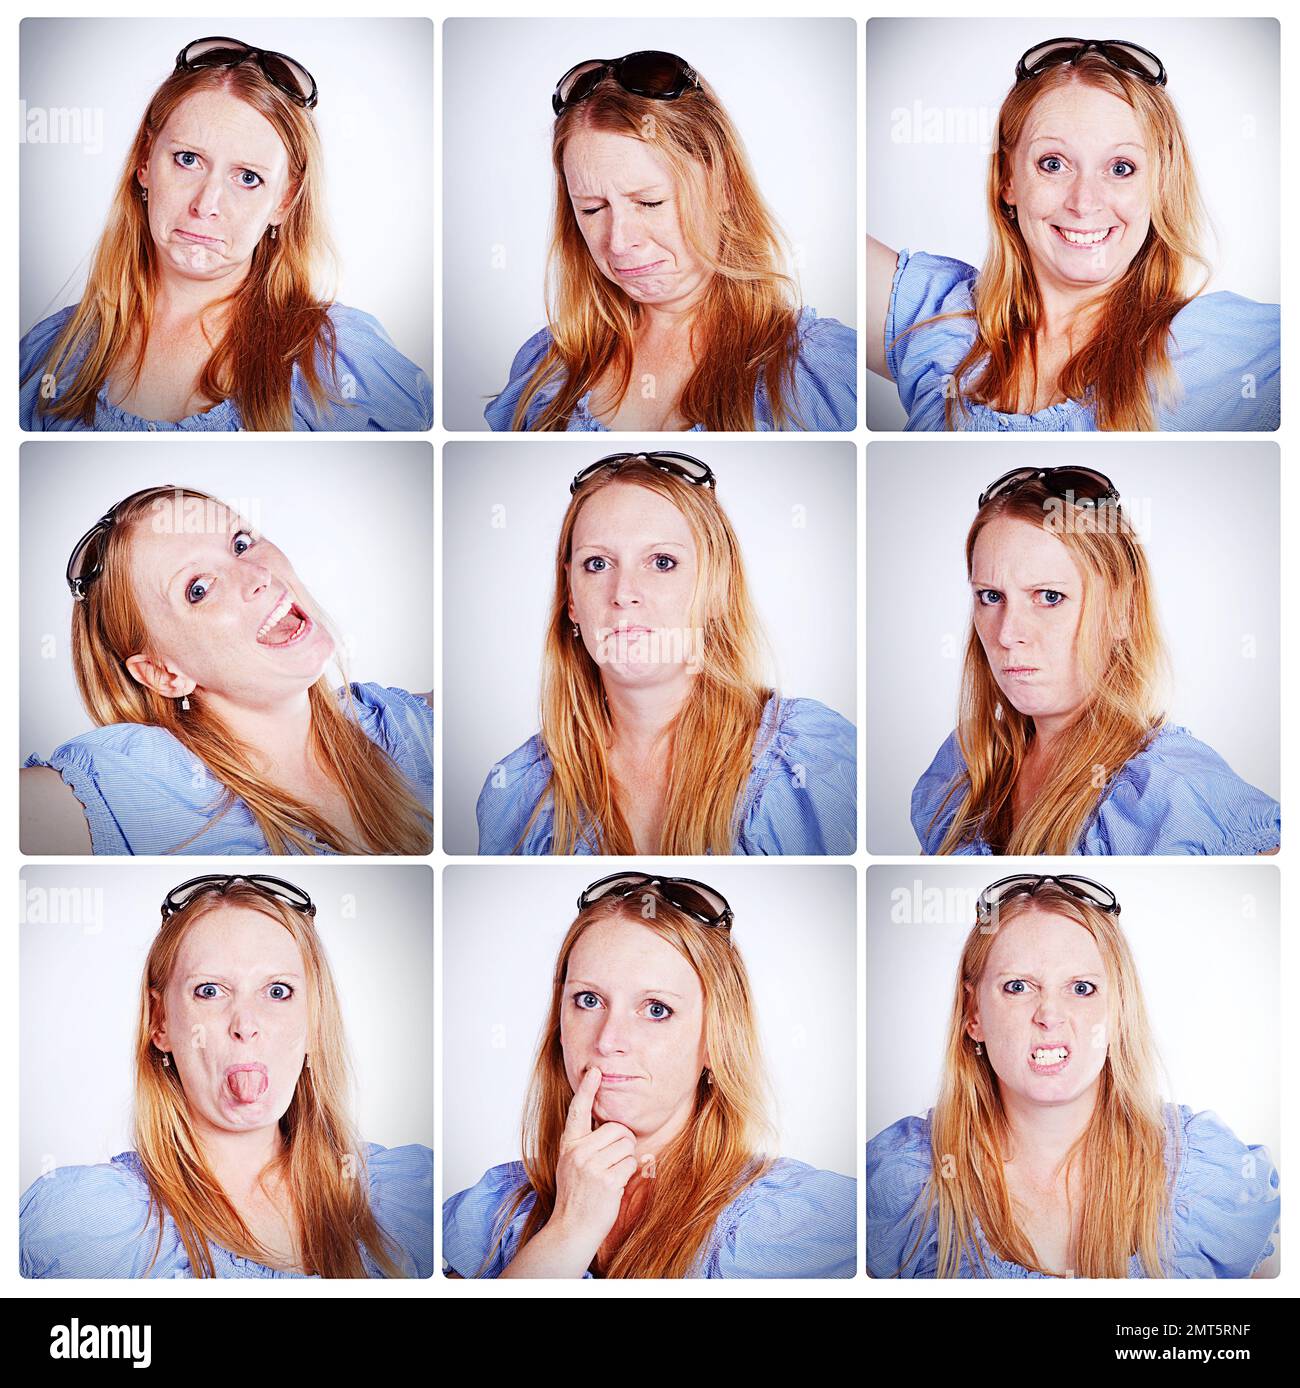 Ive got many faces...Composite shot of a woman making various facial expressions. Stock Photo